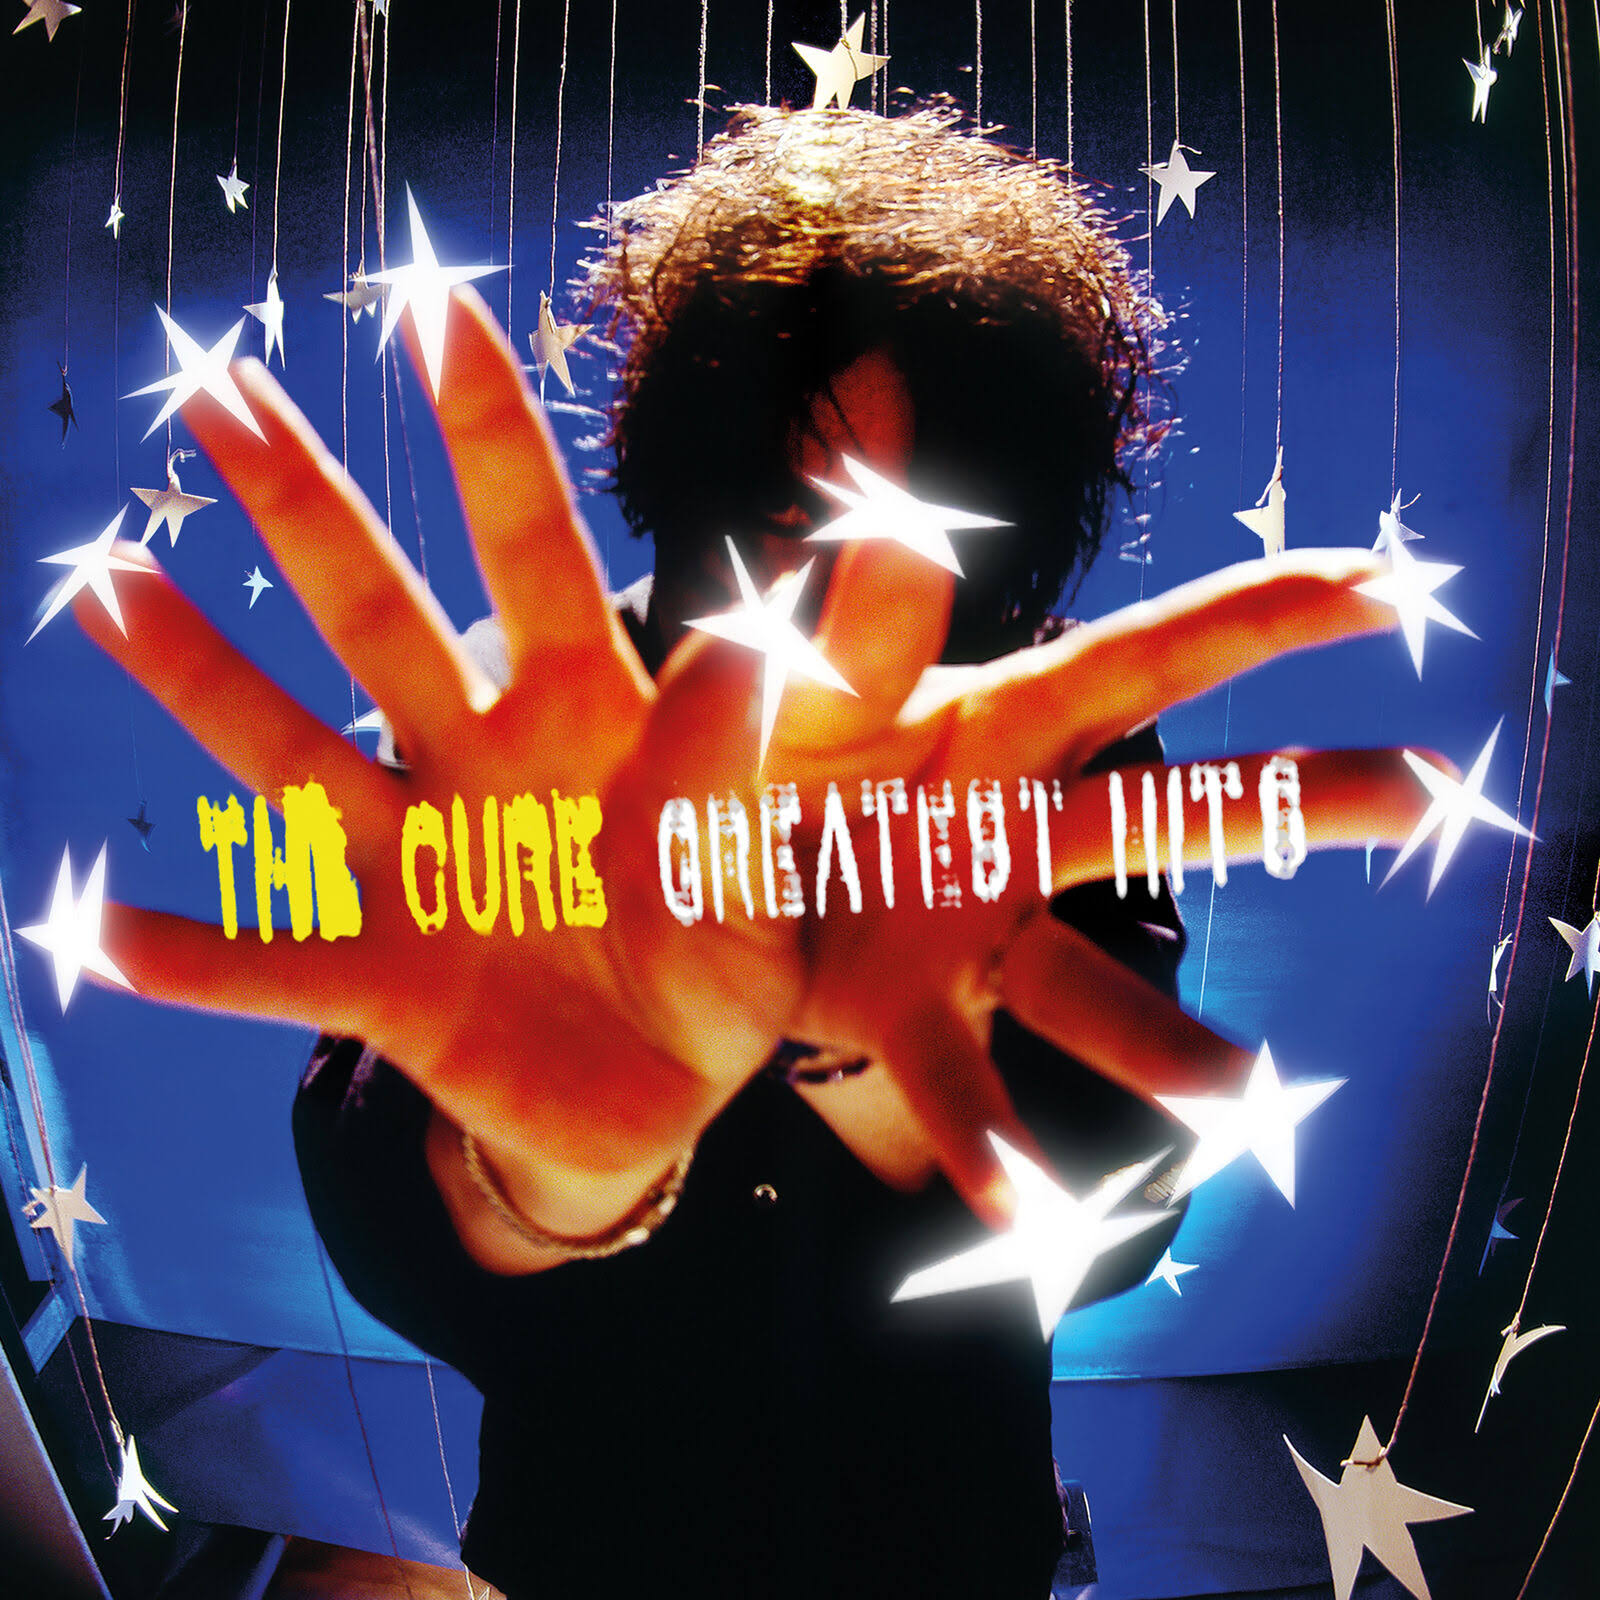 The Cure Greatest Hits - The Cure